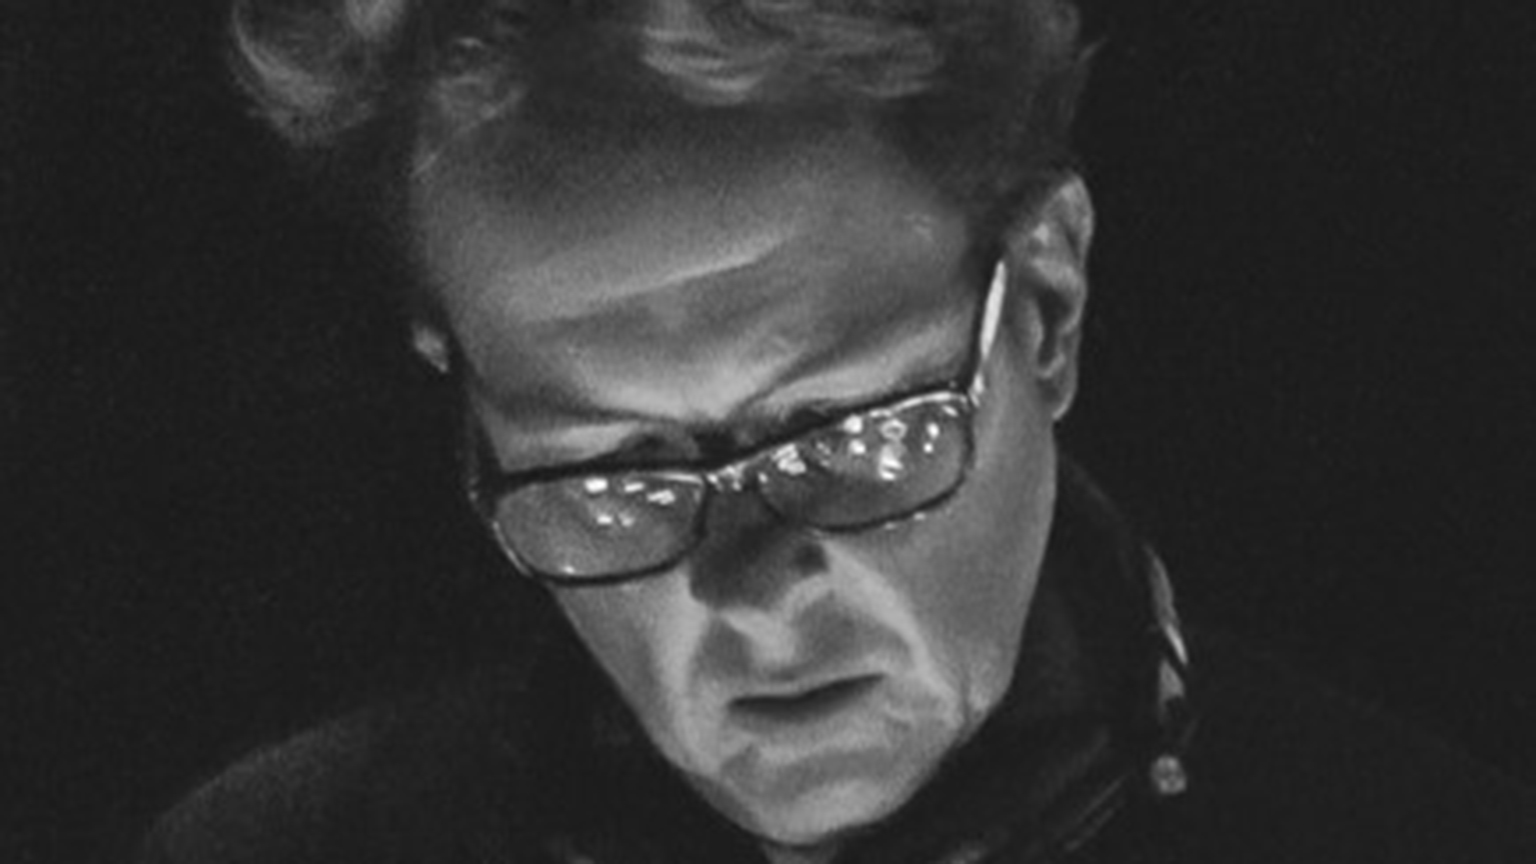 A close up of Peter C. Evans' face in black and white during a performance